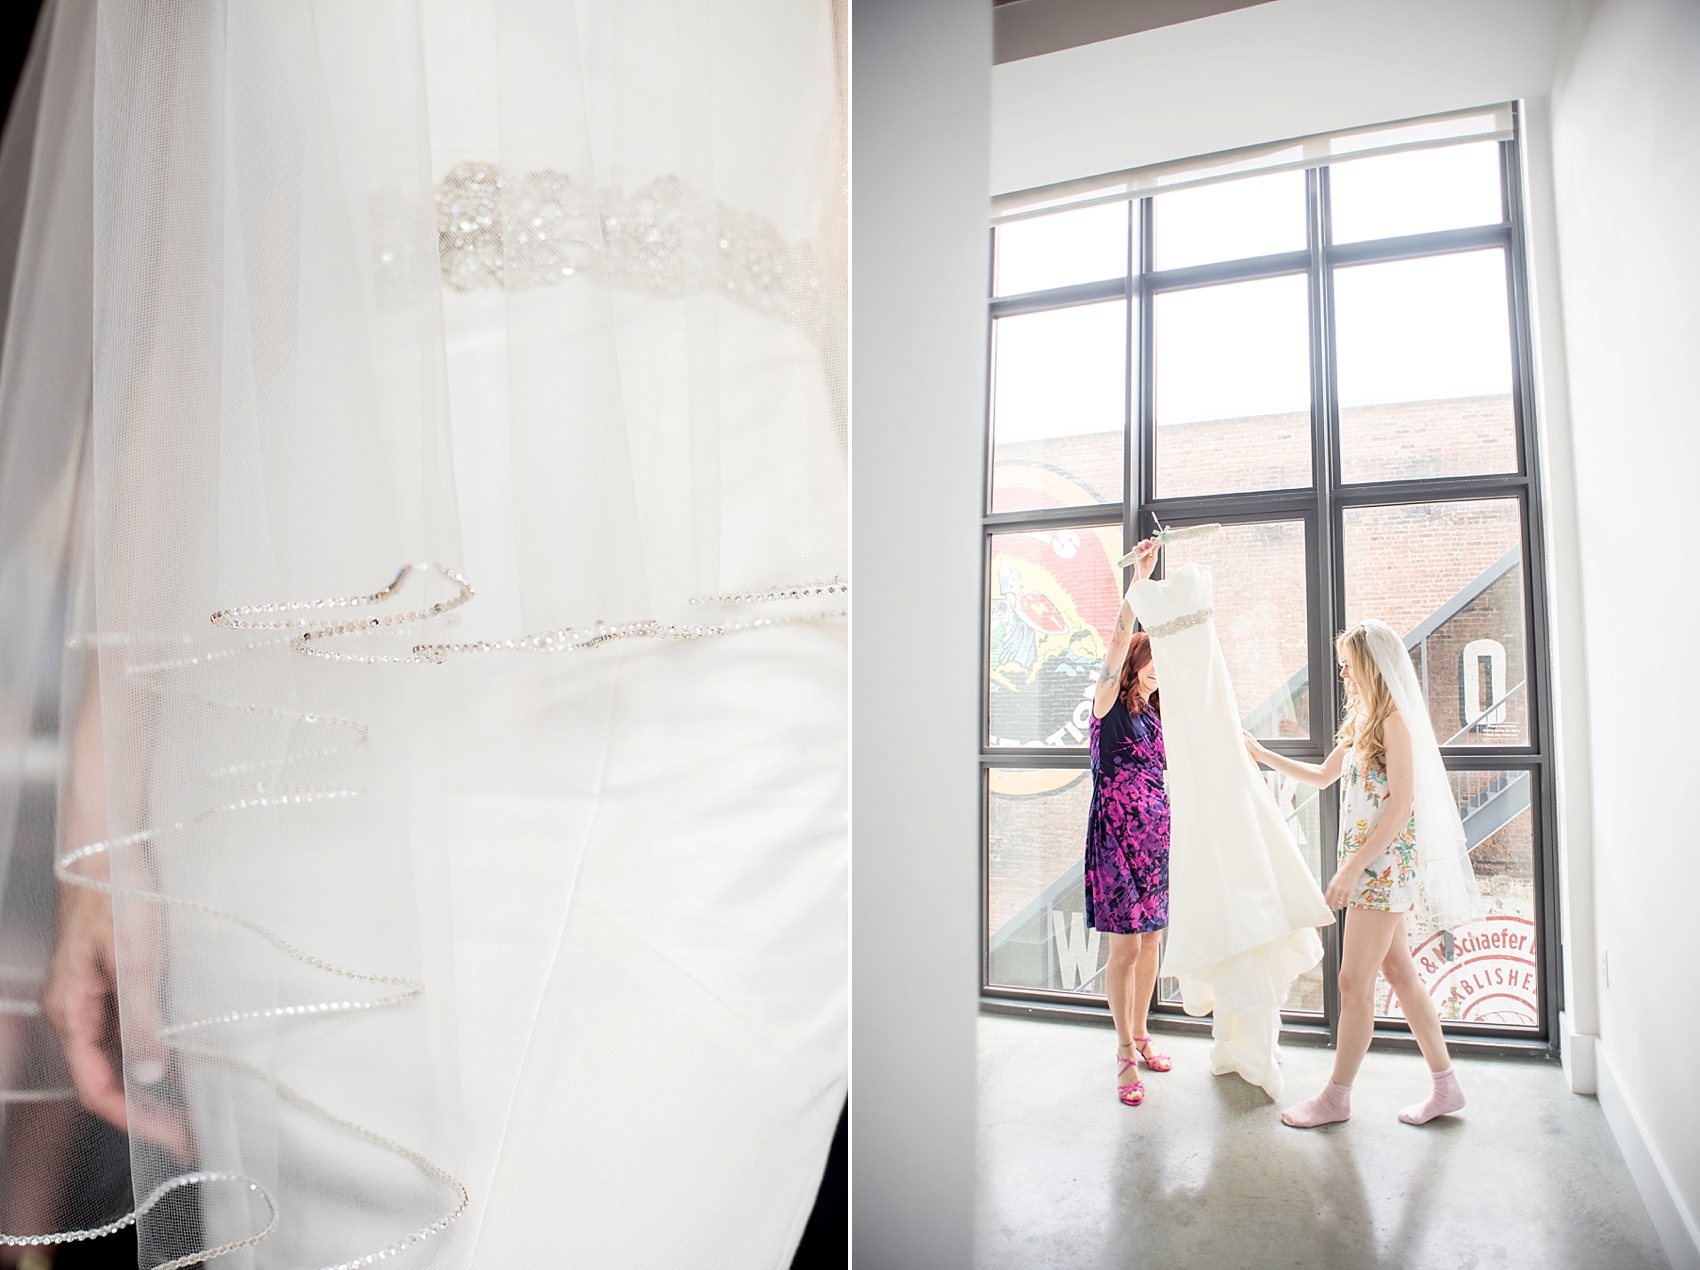 Bridal portraits and getting ready at the Wythe Hotel in Williamsburg, Brooklyn. Images by Mikkel Paige Photography.